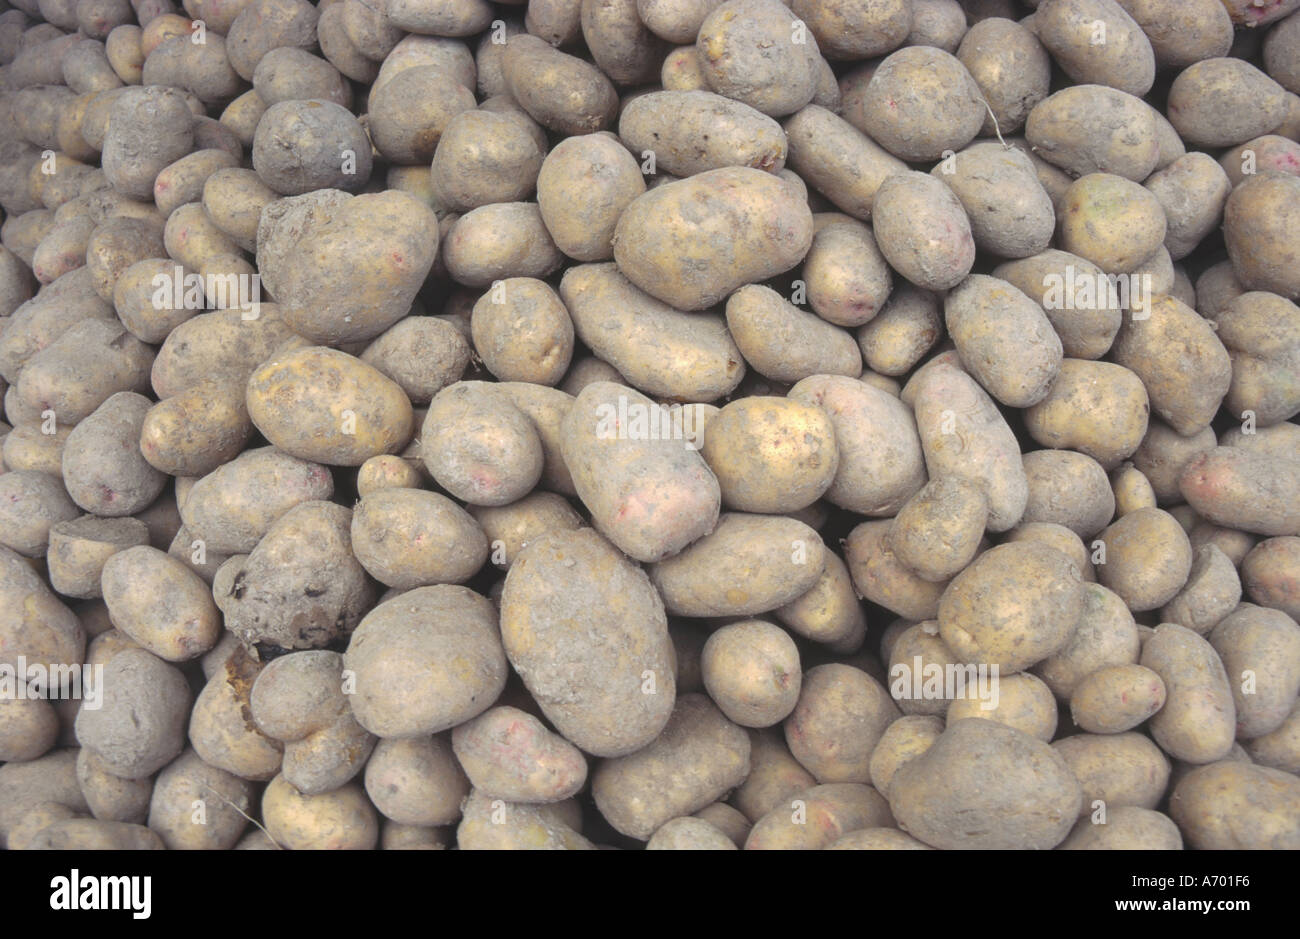 food agriculture potato potatoes from the field kartoffeln frisch vom acker Stock Photo